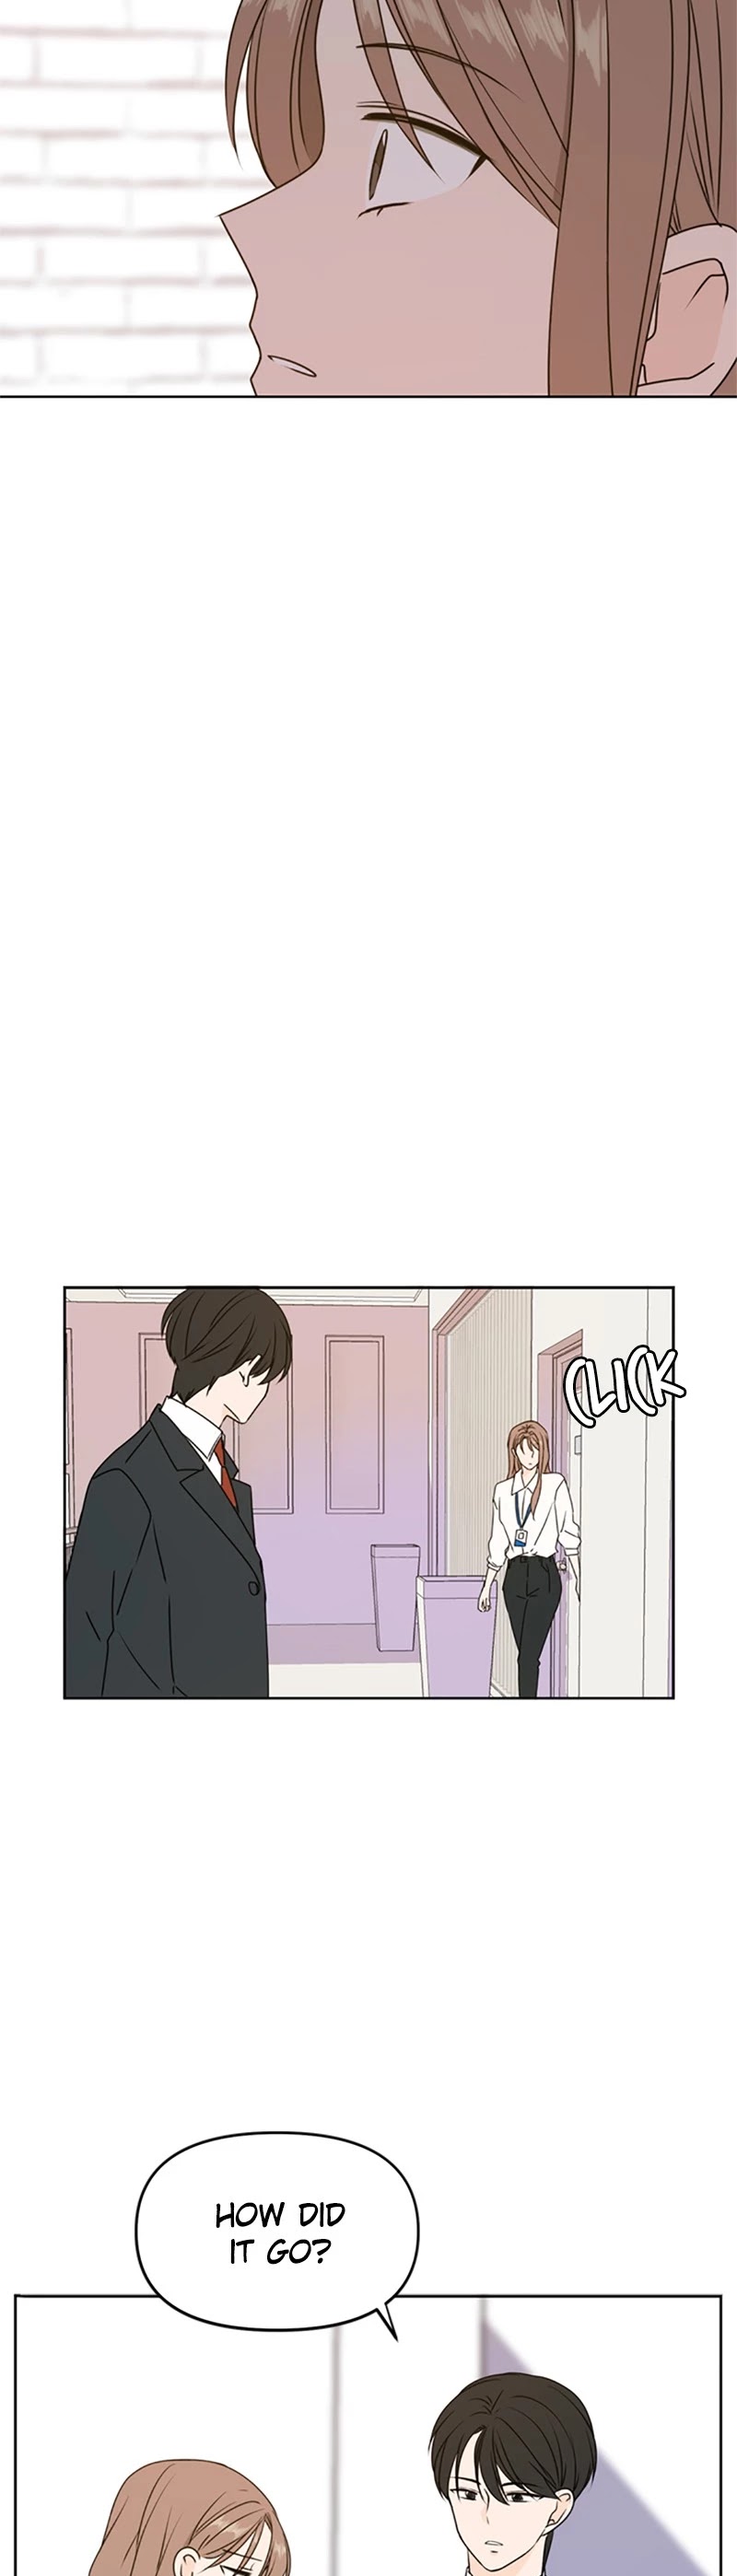 See You in My 19th Life Chapter 56 - MyToon.net